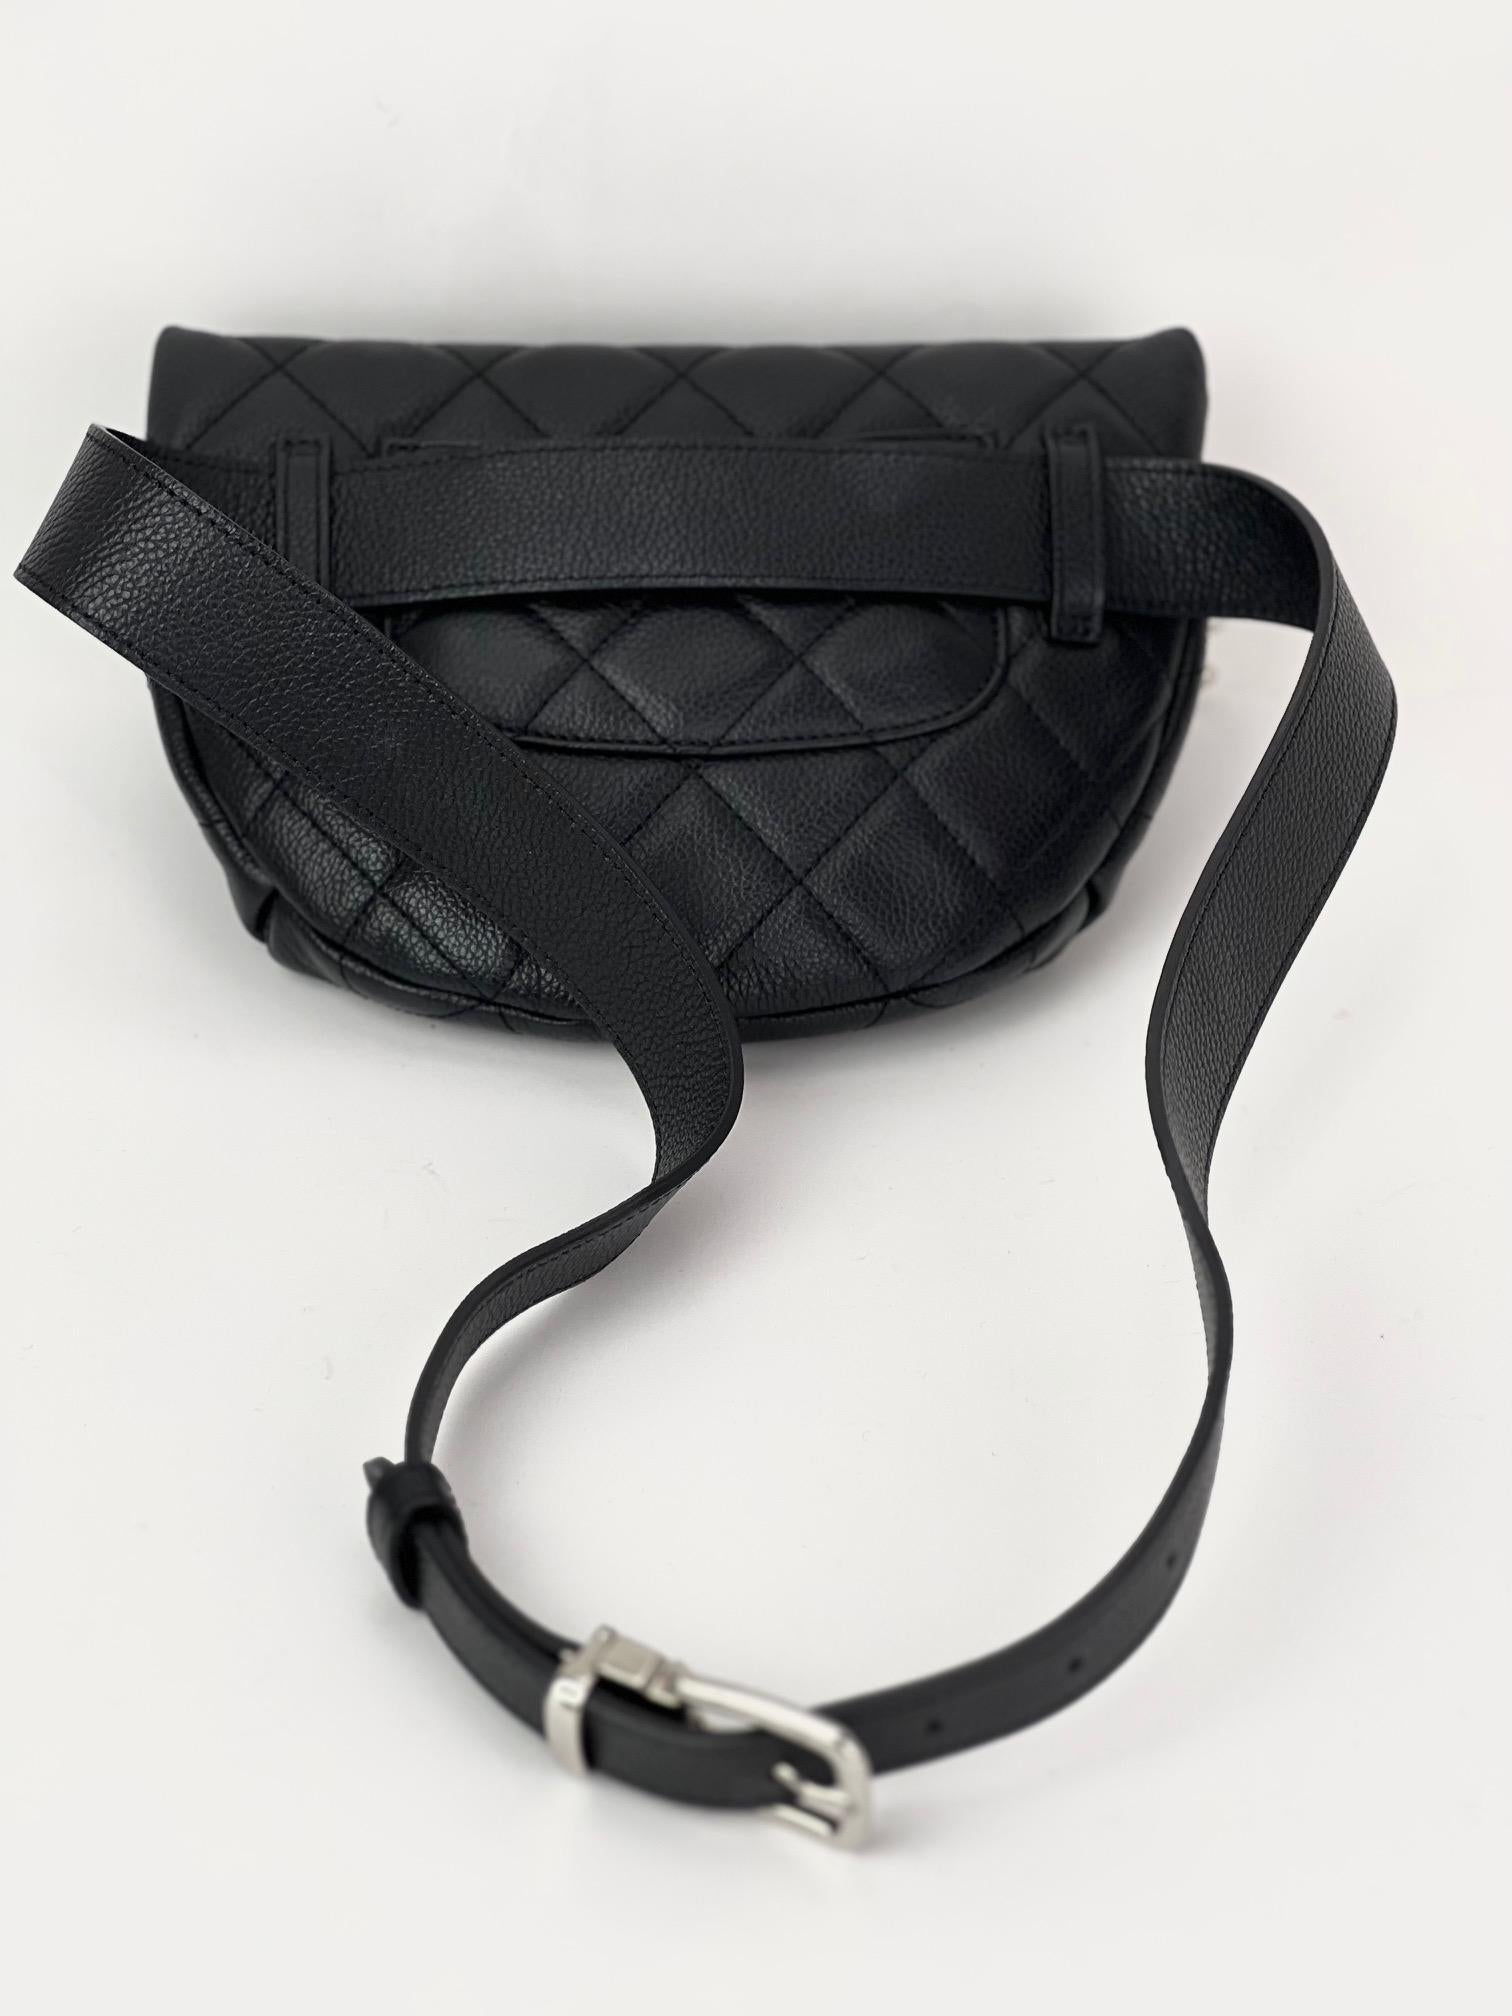 Pre-Owned  100% Authentic
CHANEL Belt Bag Grained Leather Quilted Waist BumBag
RATING: A...excellent, near mint, only
slight signs of wear
MATERIAL: quilted grained lambskin
STRAP: chanel adjustable removable leather 
41'' long 1st hole length